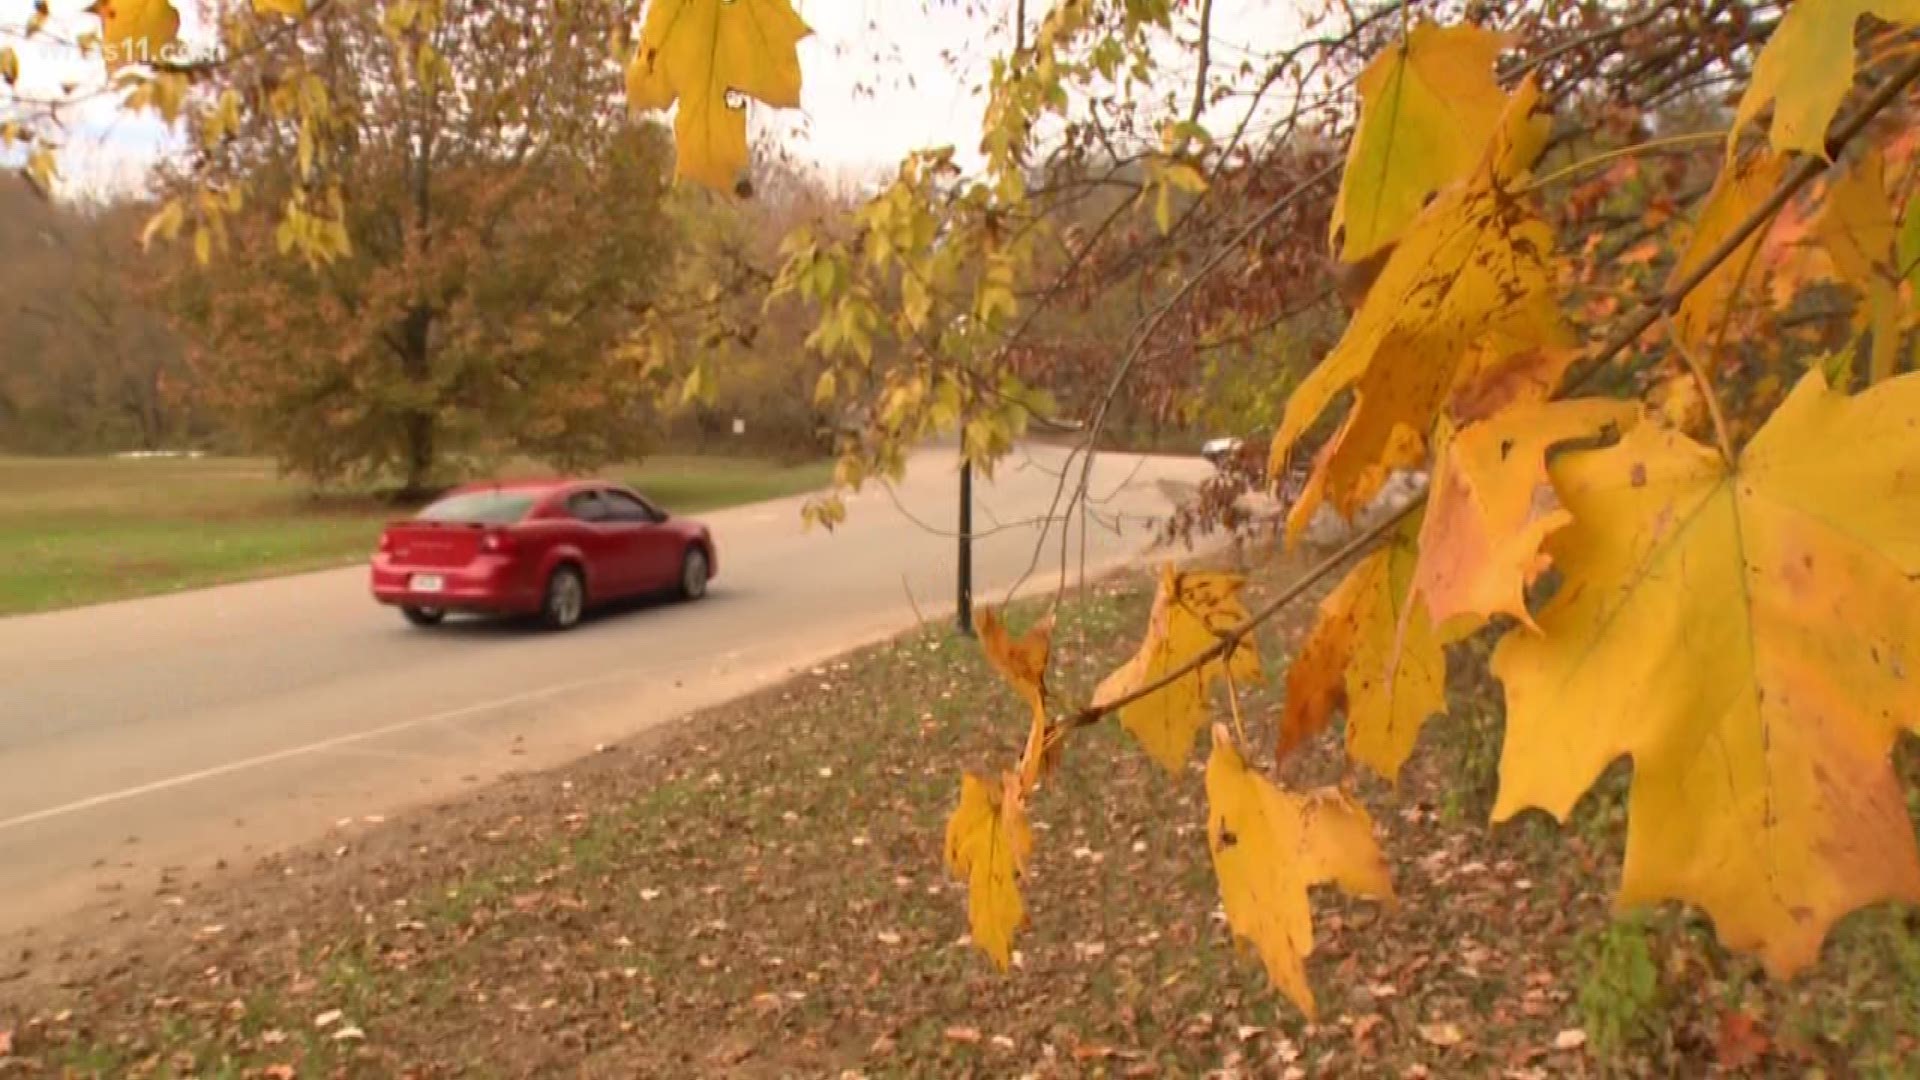 This has been the wettest September recorded - but does more rain cause more colorful foliage? WHAS11's Kaitlynn Fish put that theory to the test.